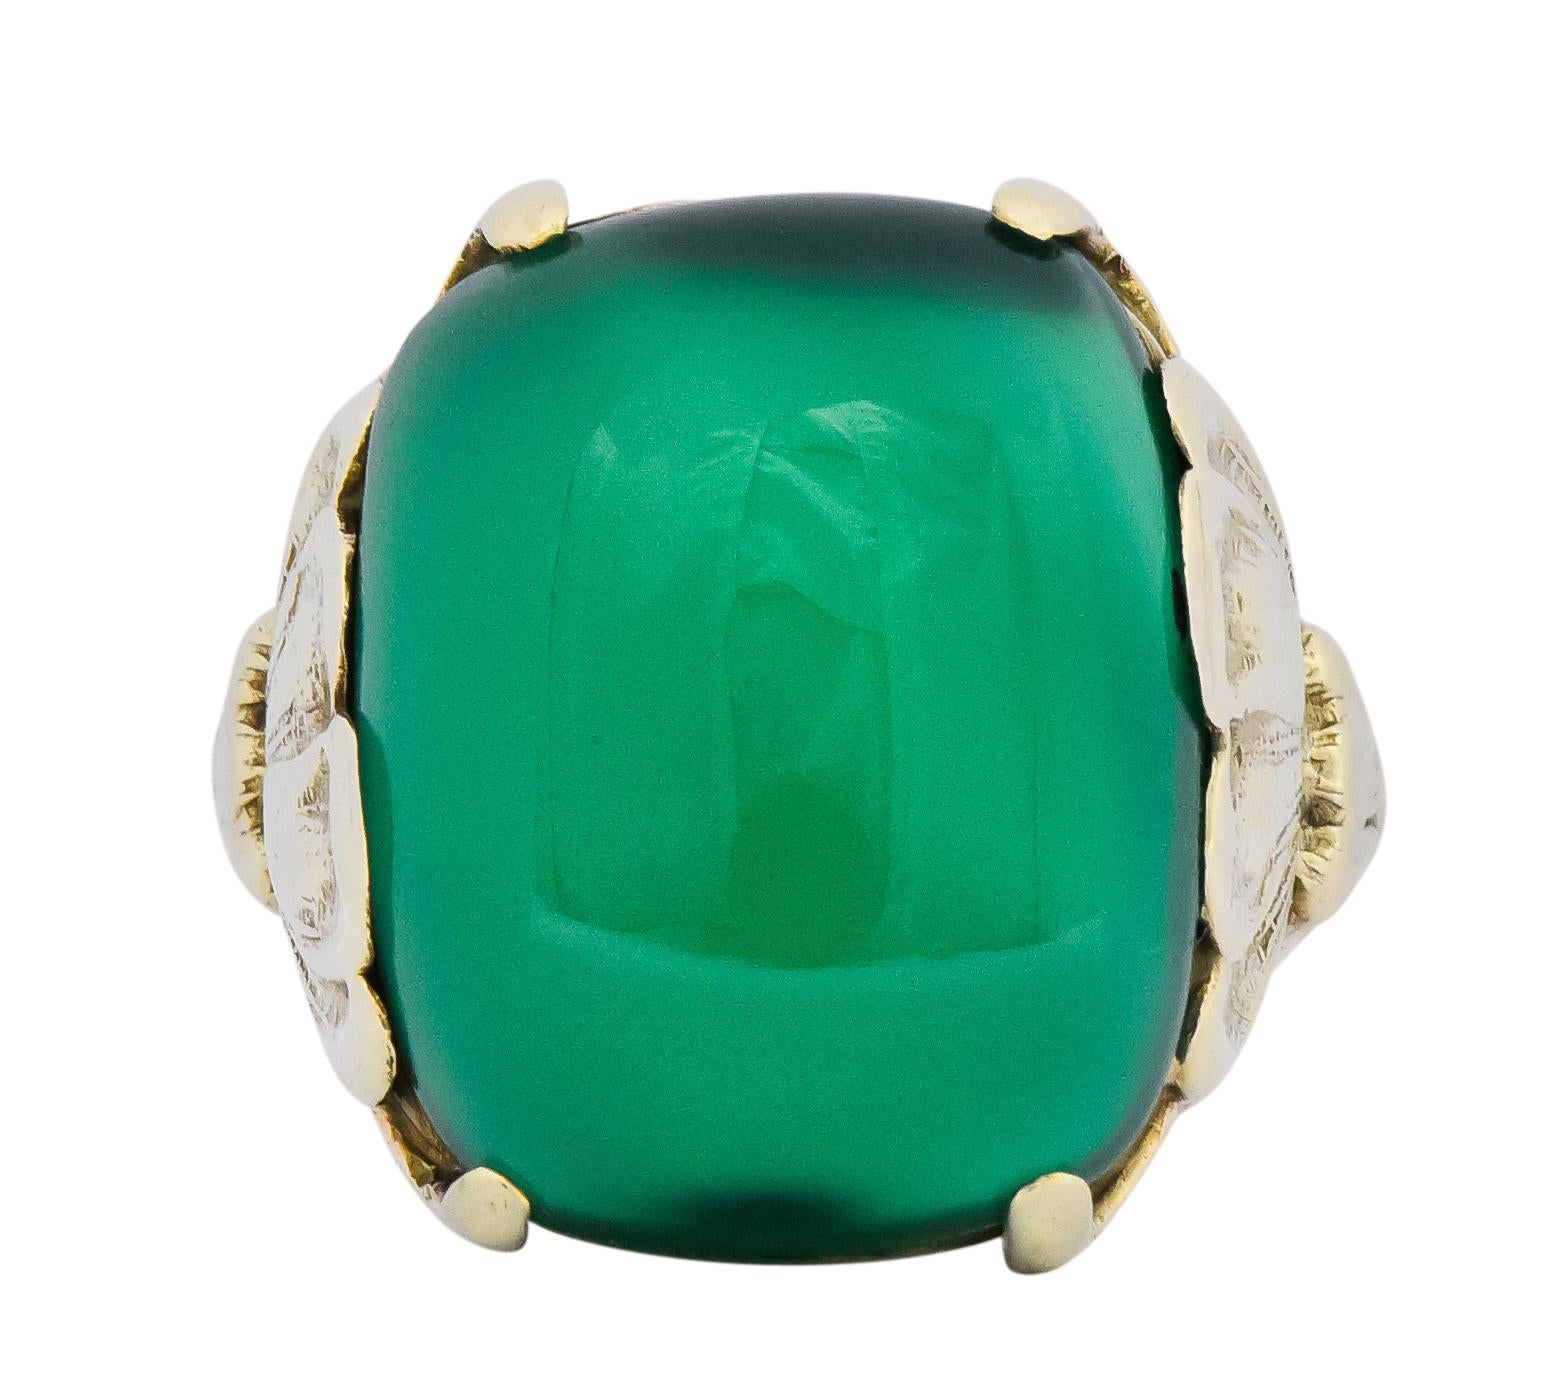 Centering a cushion cabochon chrysoprase measuring 16.0 x 12.0 mm, translucent and a lush medium dark green

Flanked by gold prongs extending from stylized lotus motif on shoulders

With a ribbed shank stamped 14k for 14 karat gold

Ring Size: 4 1/4